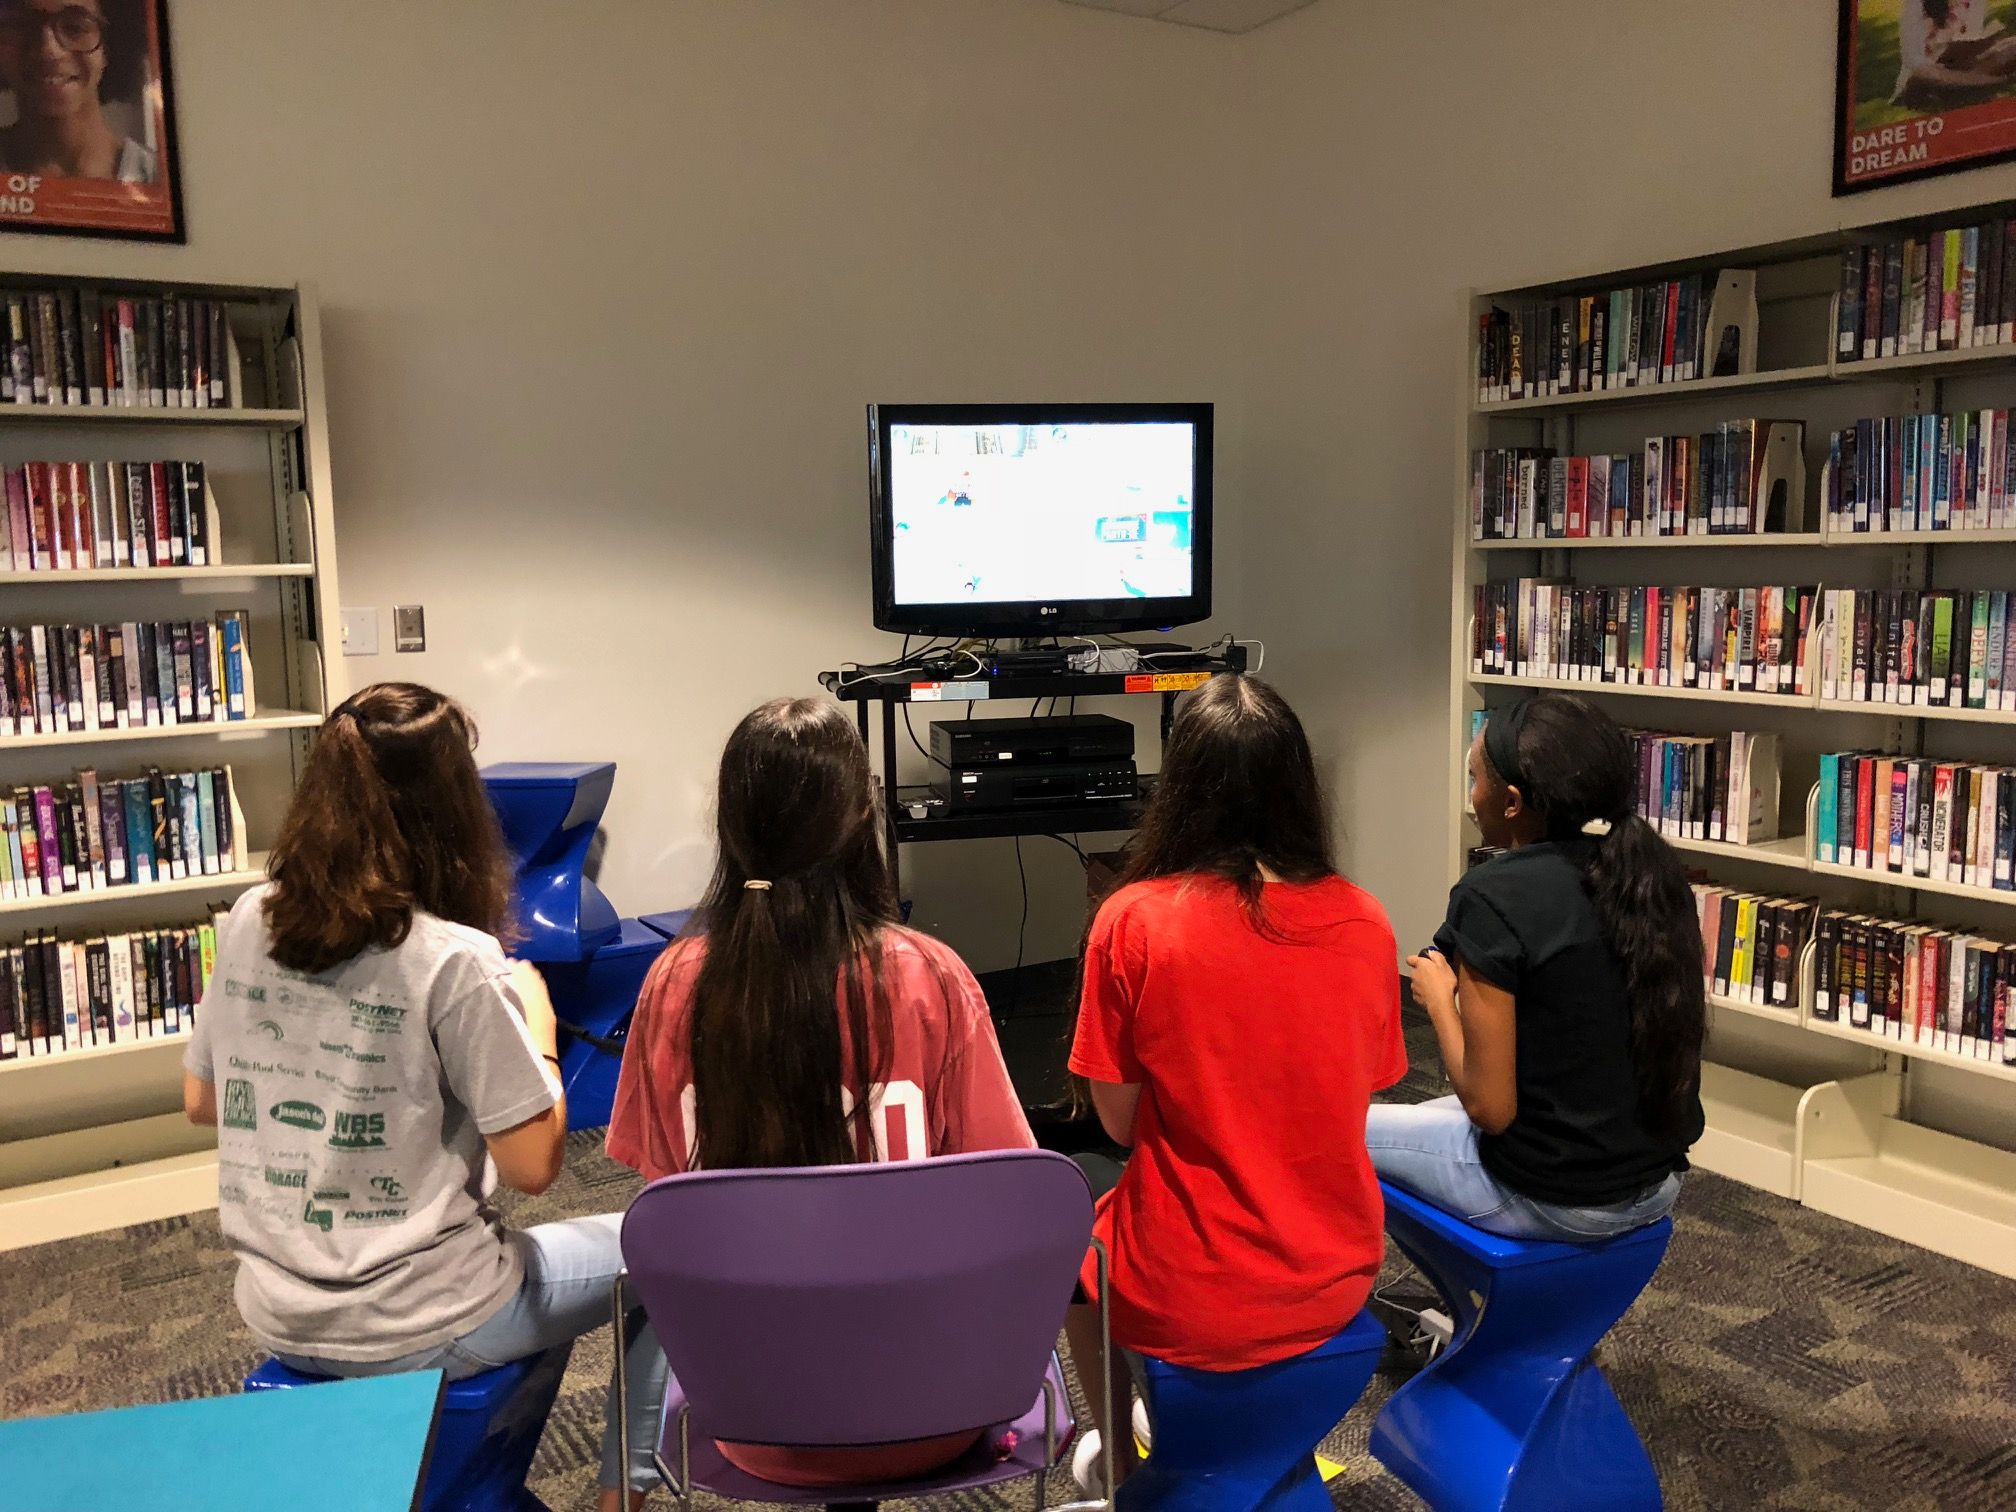 Teens playing video games at the library.